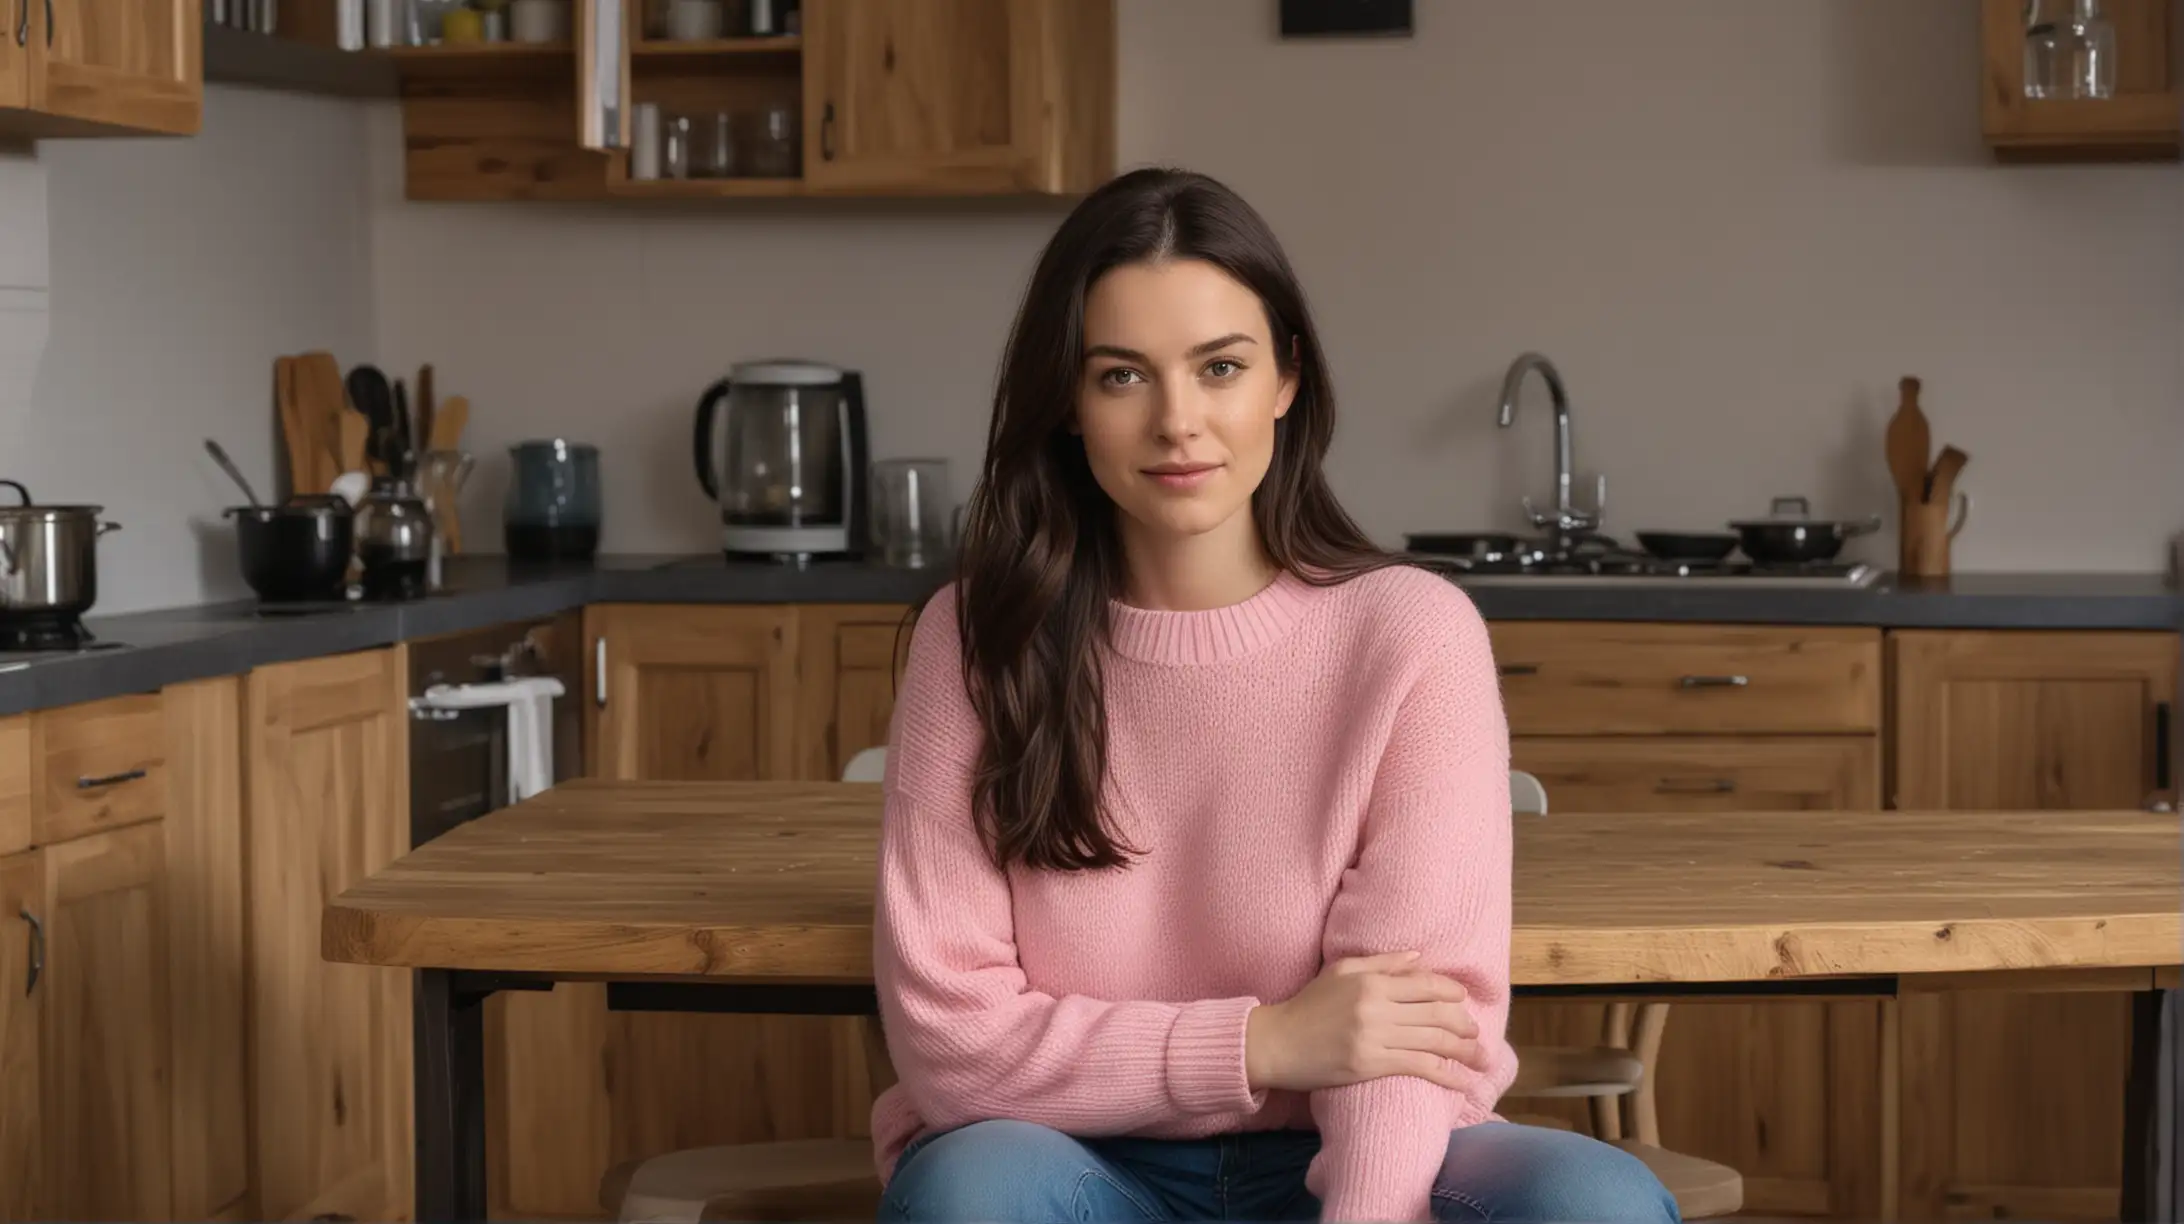 30 year old pale white woman with long big dark brown hair, wearing a pink sweater and blue jeans looking at camera. She is sitting down in a chair at a wooden kitchen table, modern kitchen at night